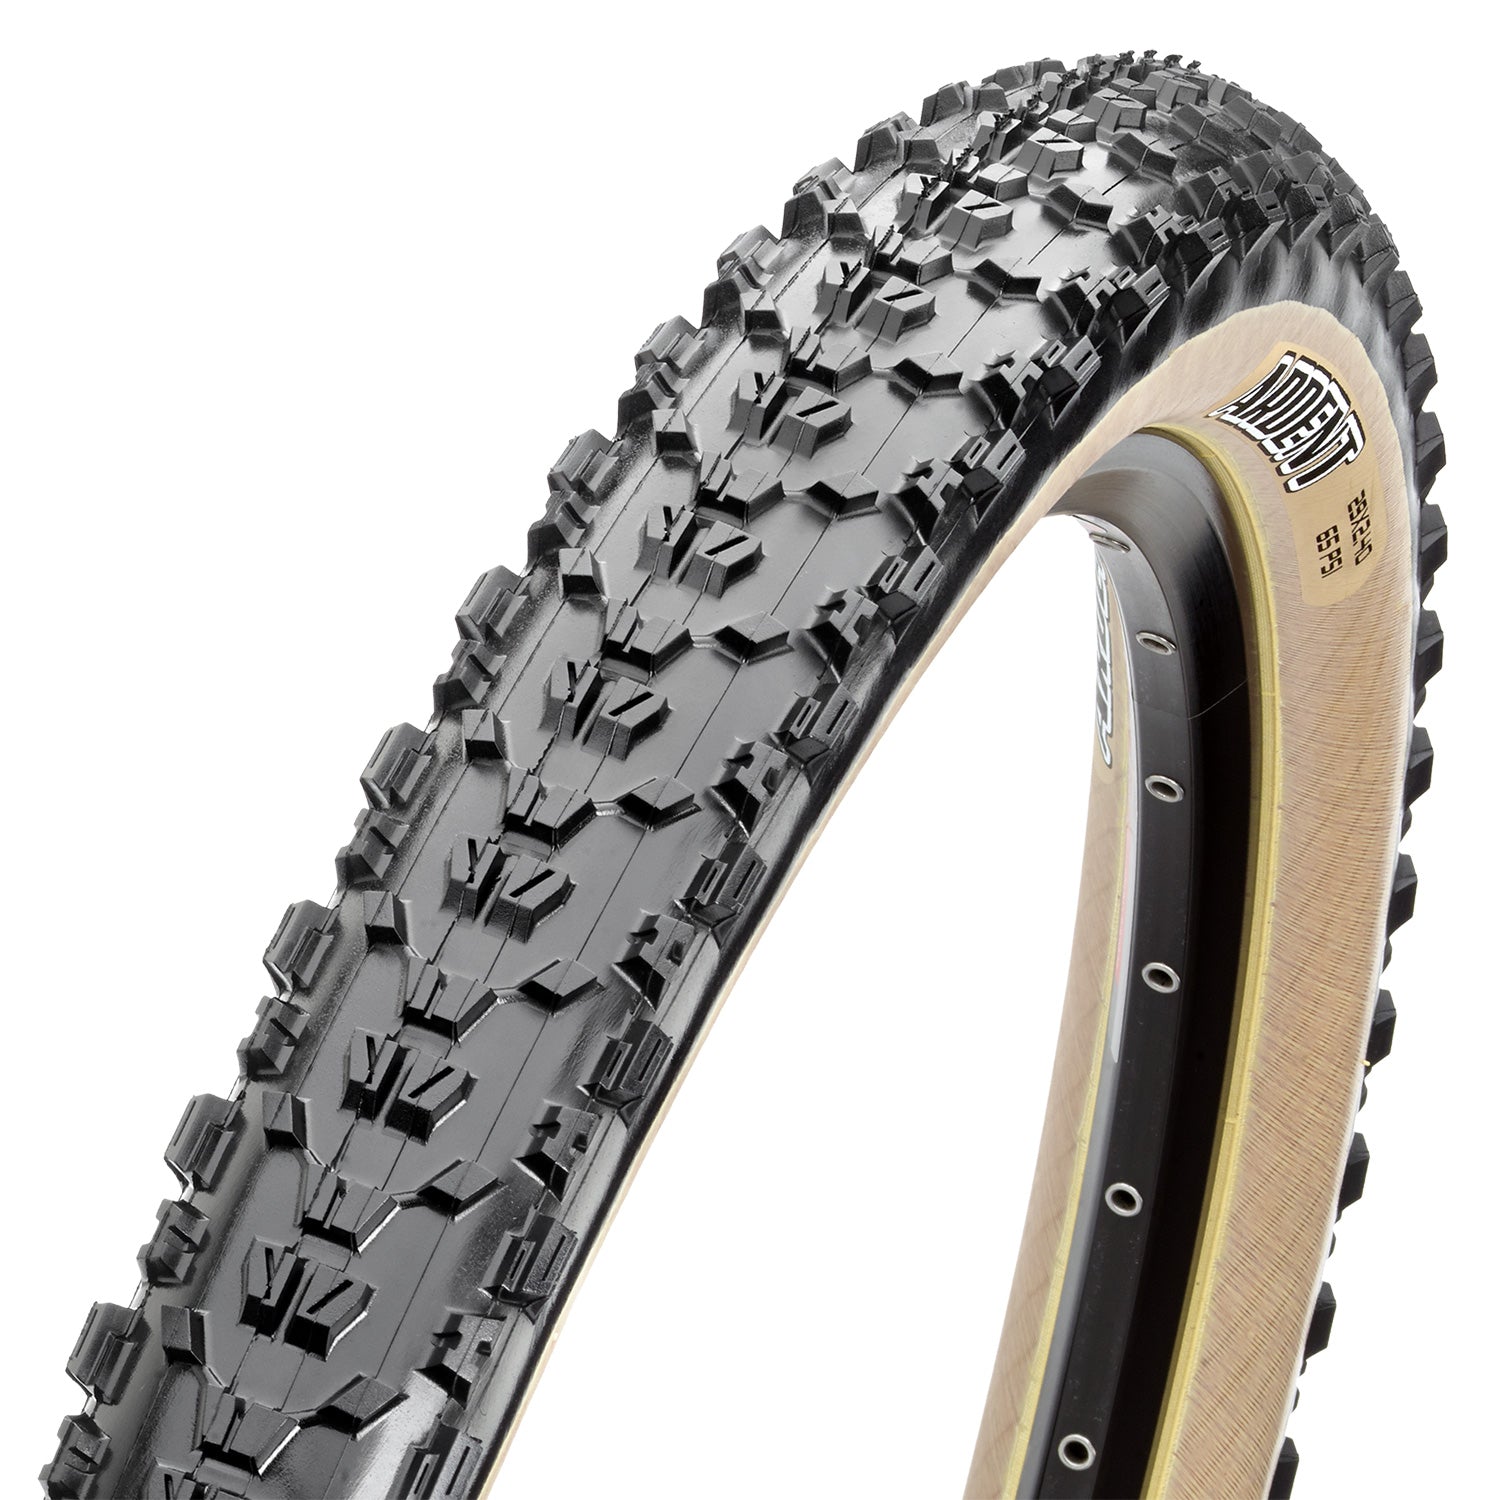 Maxxis Ardent Skinwall Tire